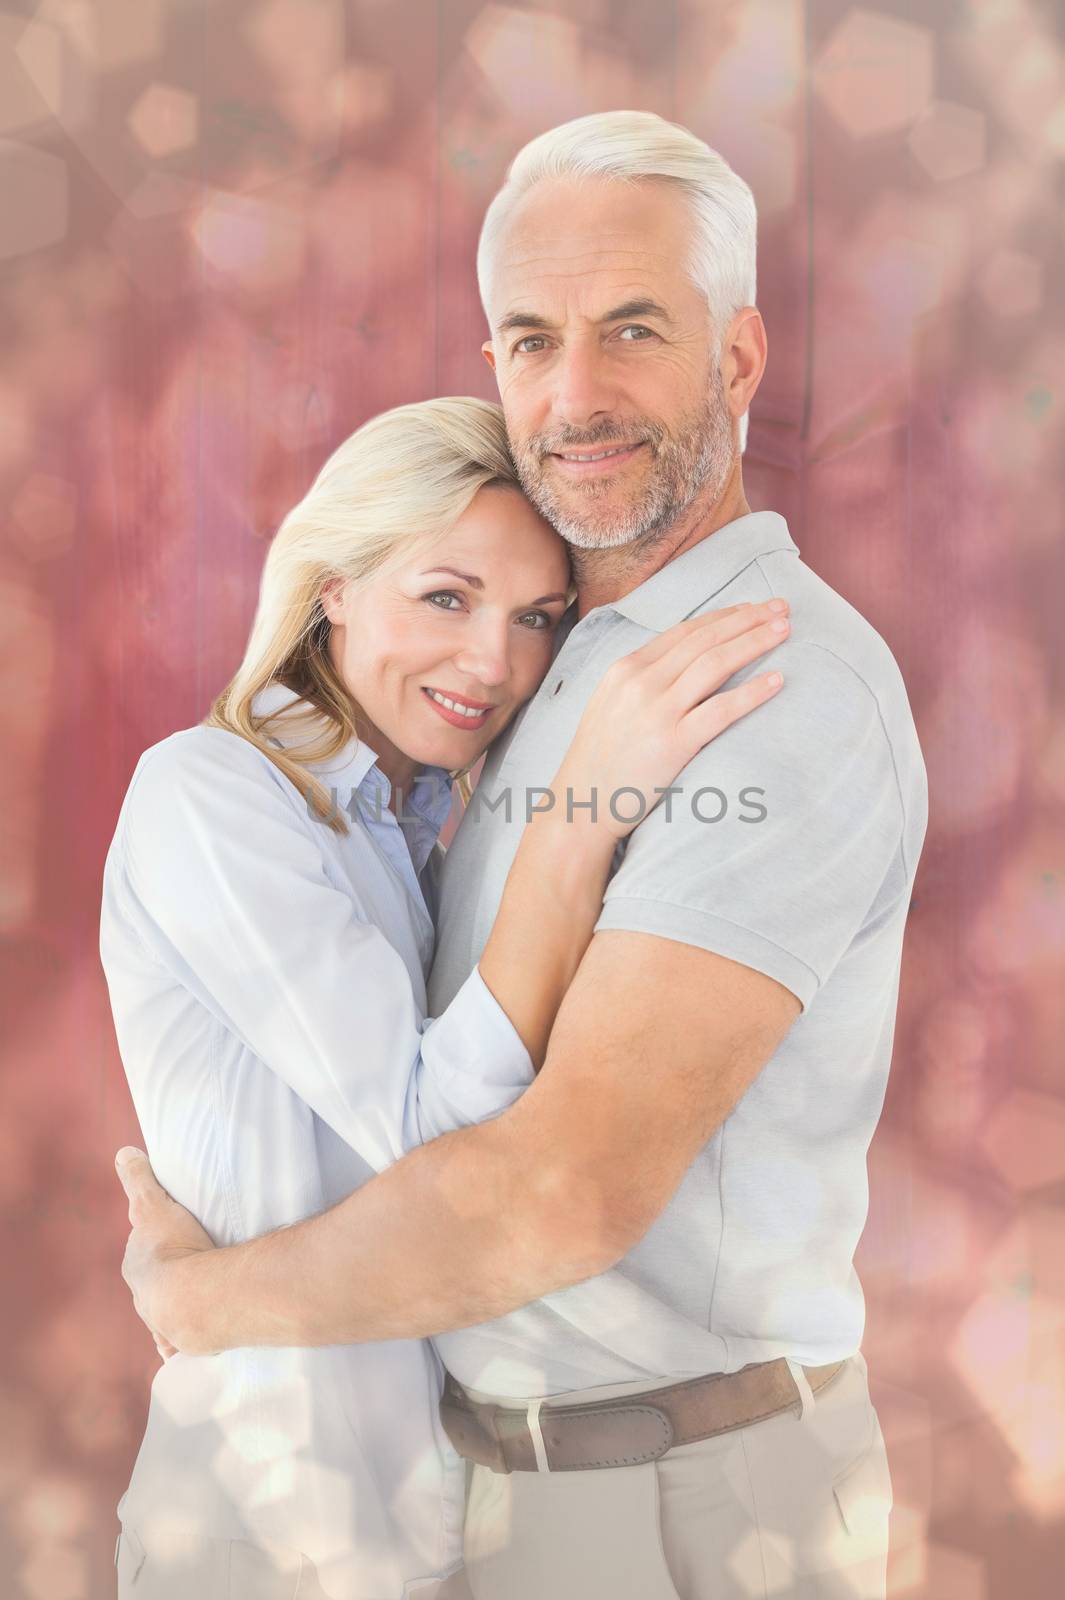 Happy couple standing and smiling at camera against light glowing dots design pattern